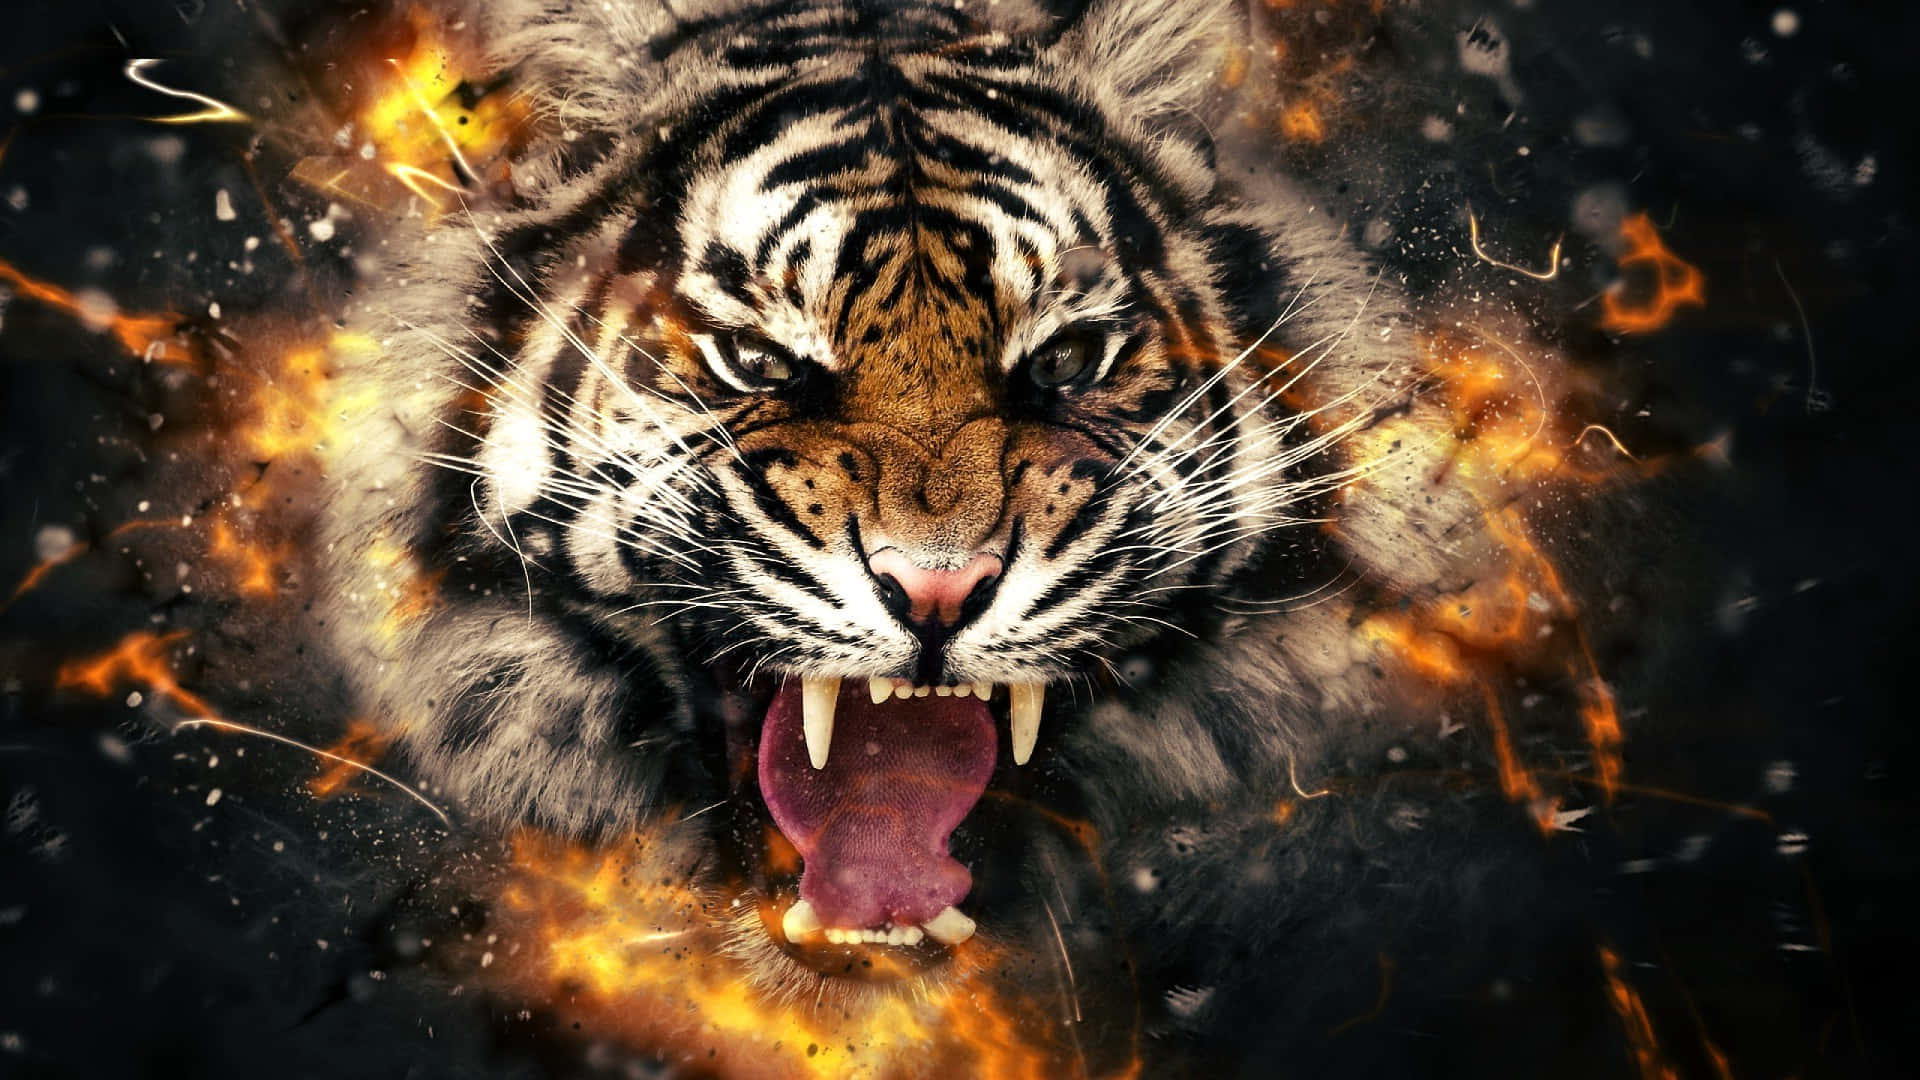 Tiger Face In Rage With Fire Wallpaper